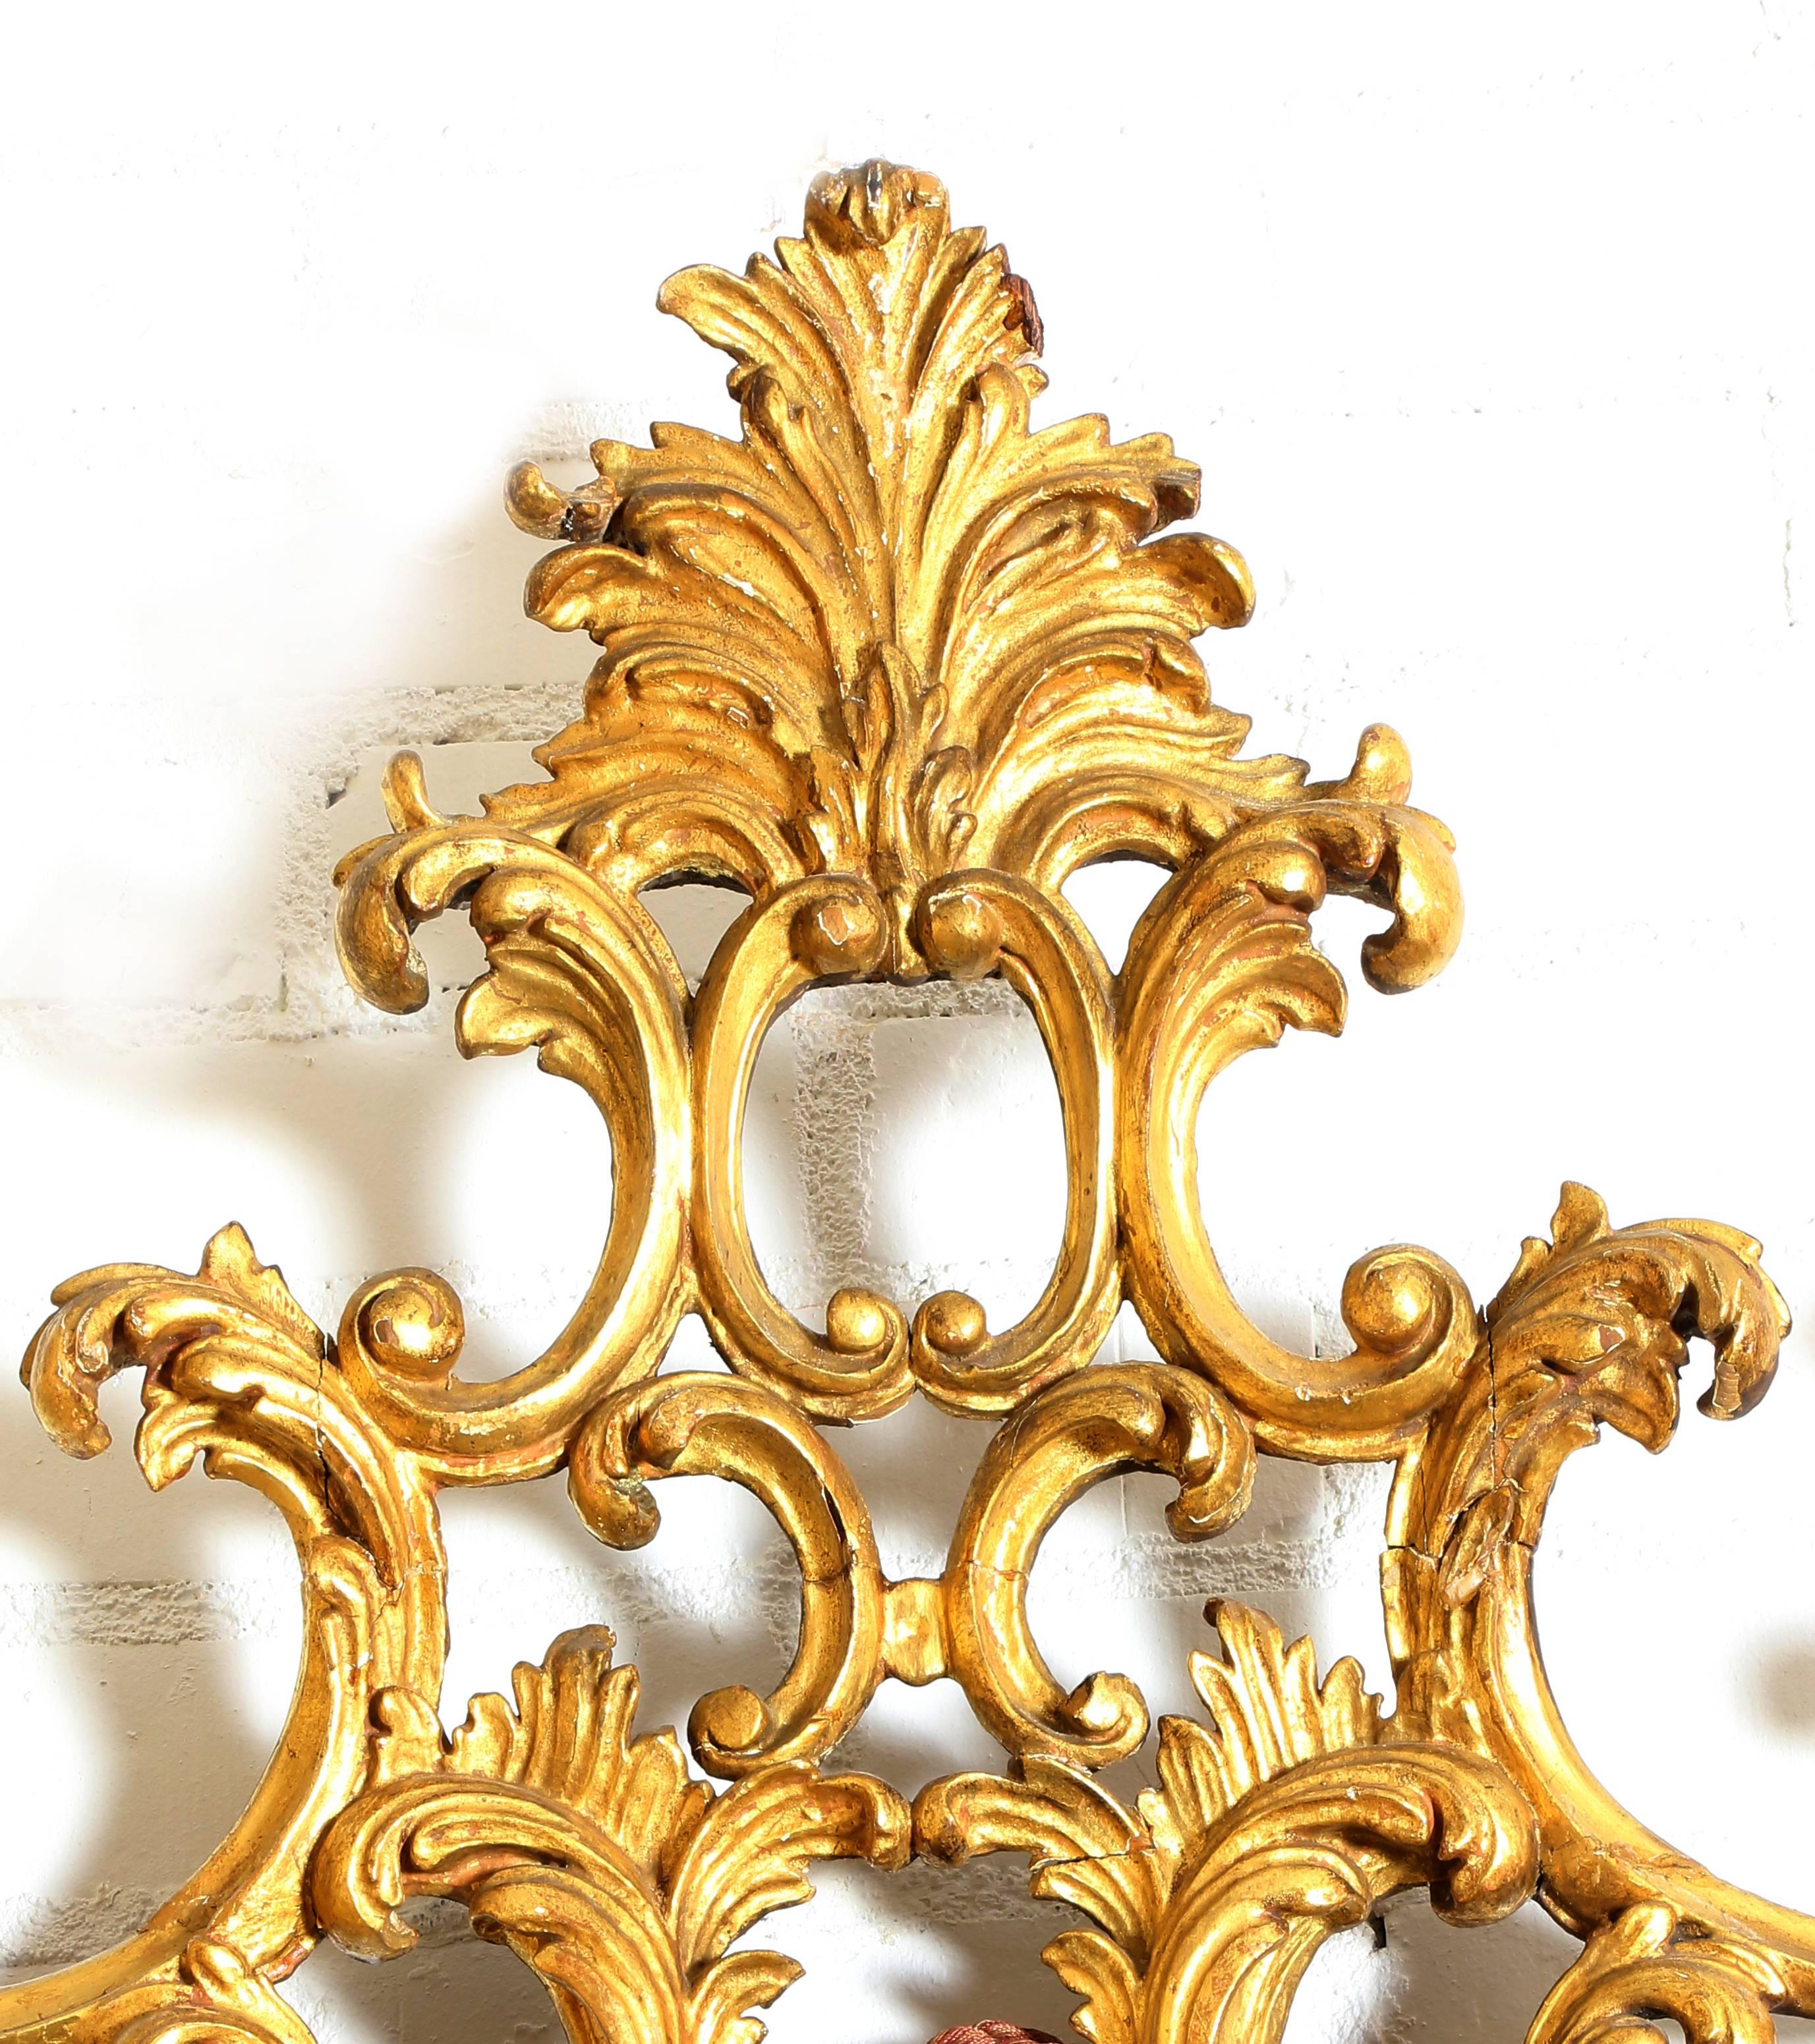 Talian gilt Louis XV style wall mirror, 20th century, the ornate pierced foliate crest and frame with single scrolling band crossing the shaped mirror plate.
 